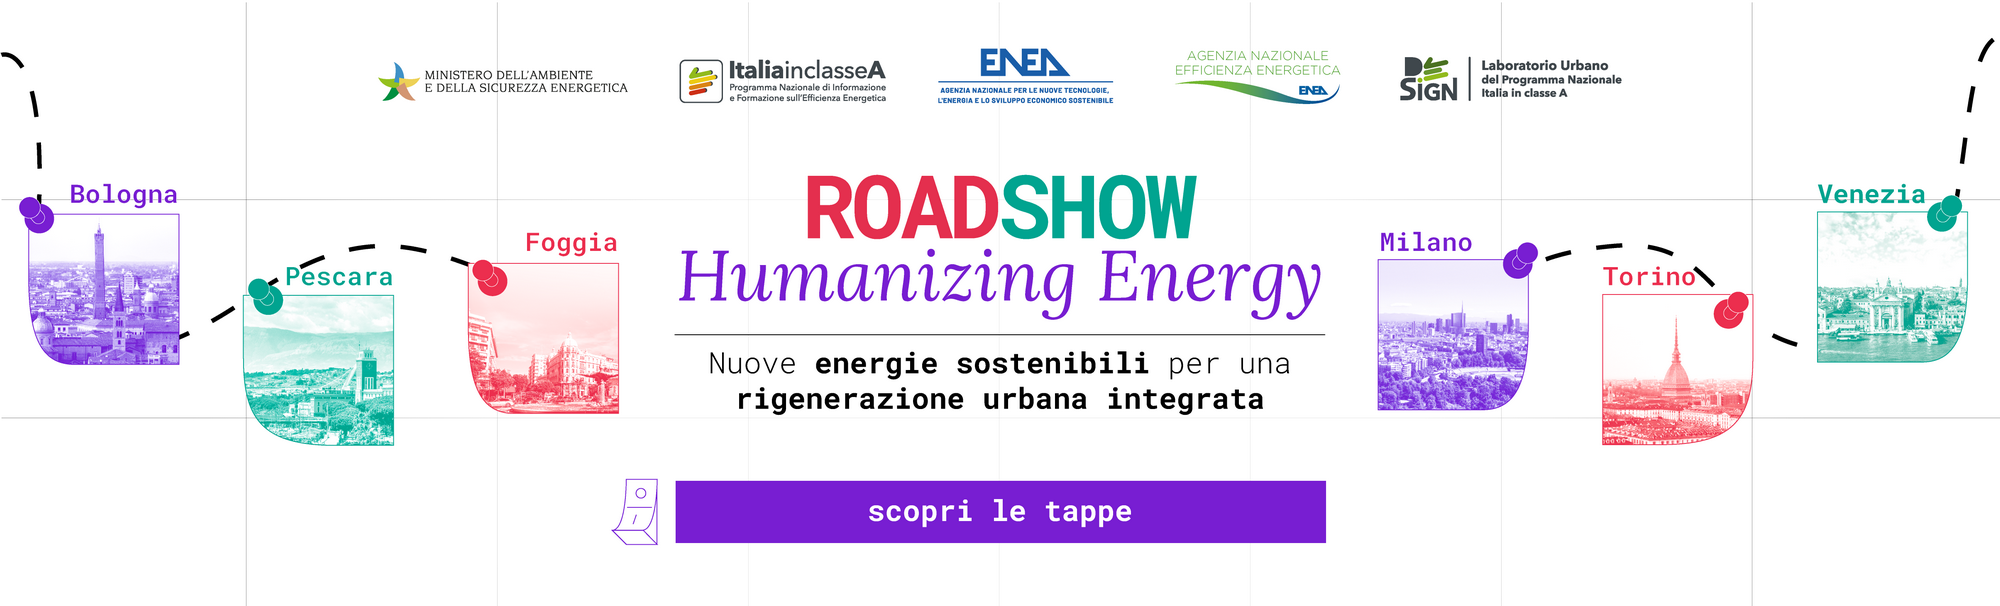 roadshow_Banner Generale-orizzontale.png